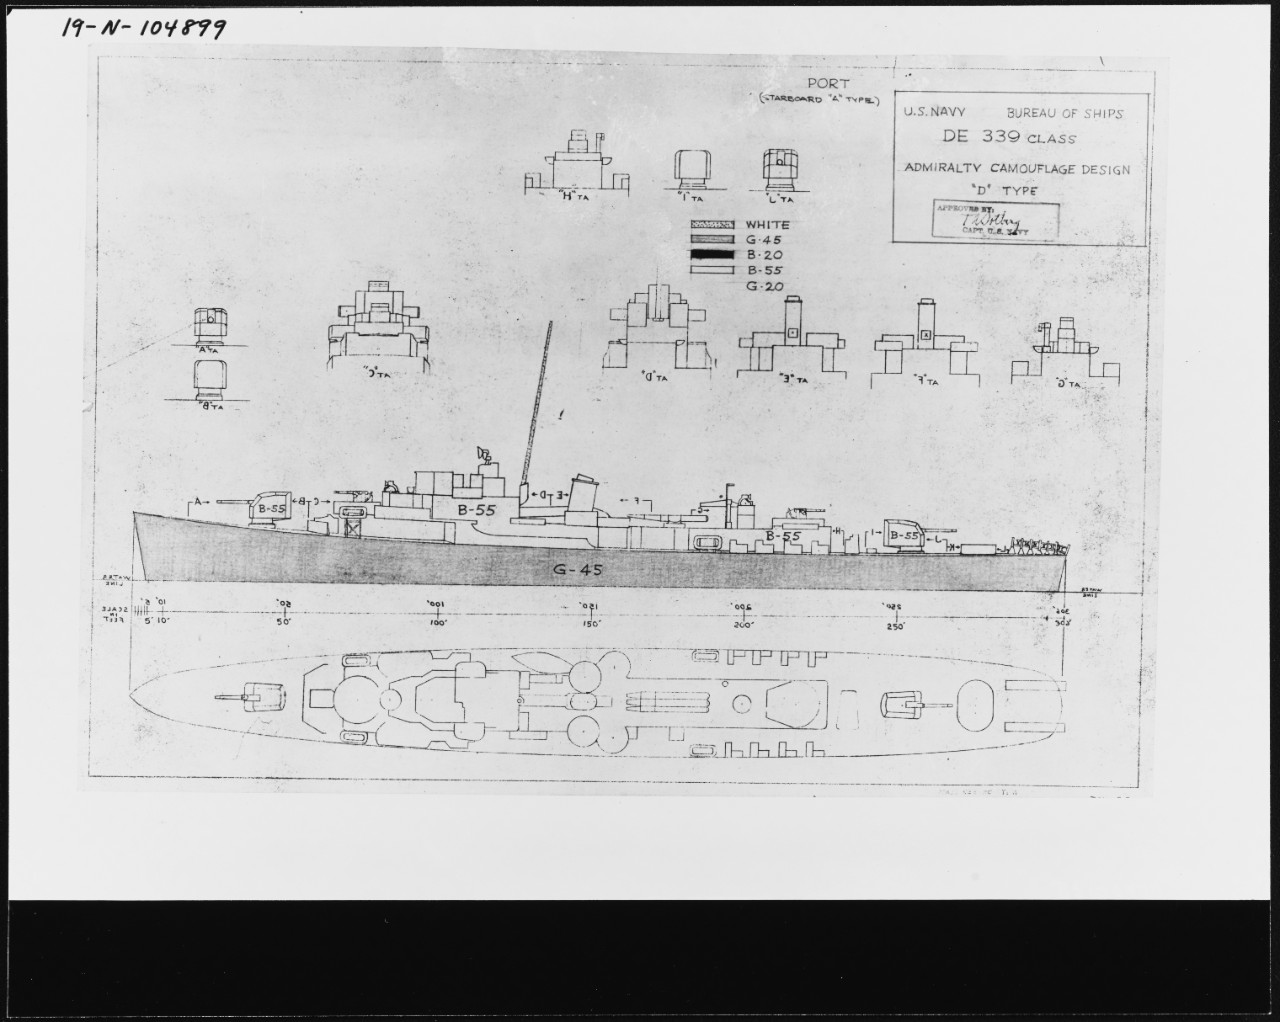 Photo #: 19-N-104899  Admiralty Camouflage Design,  "D" Type